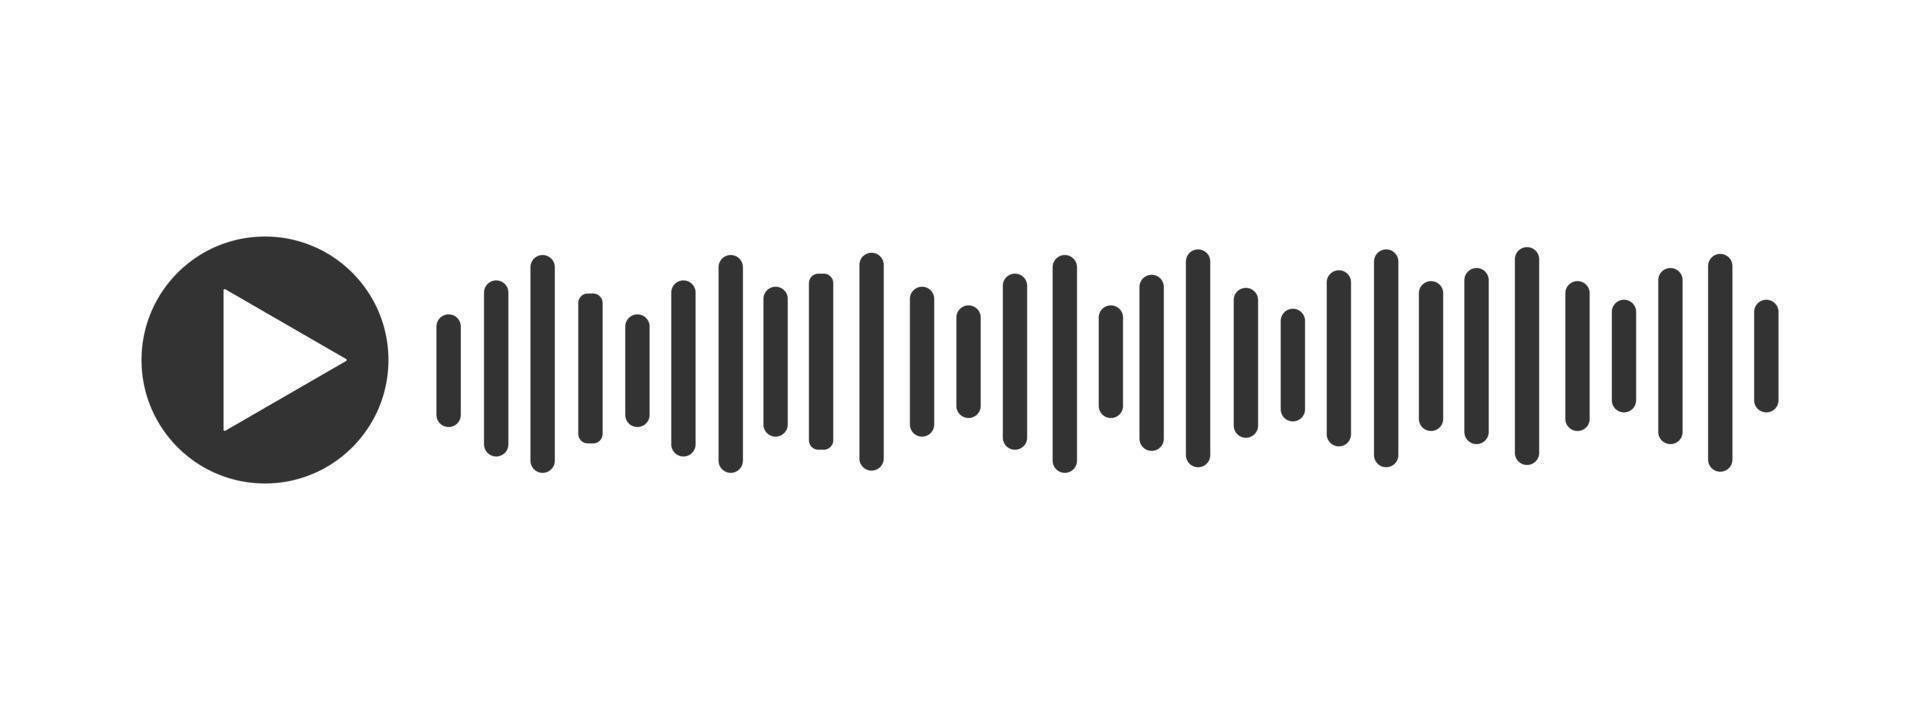 Voice message sign. Audio chat element with play icon and sound wave vector